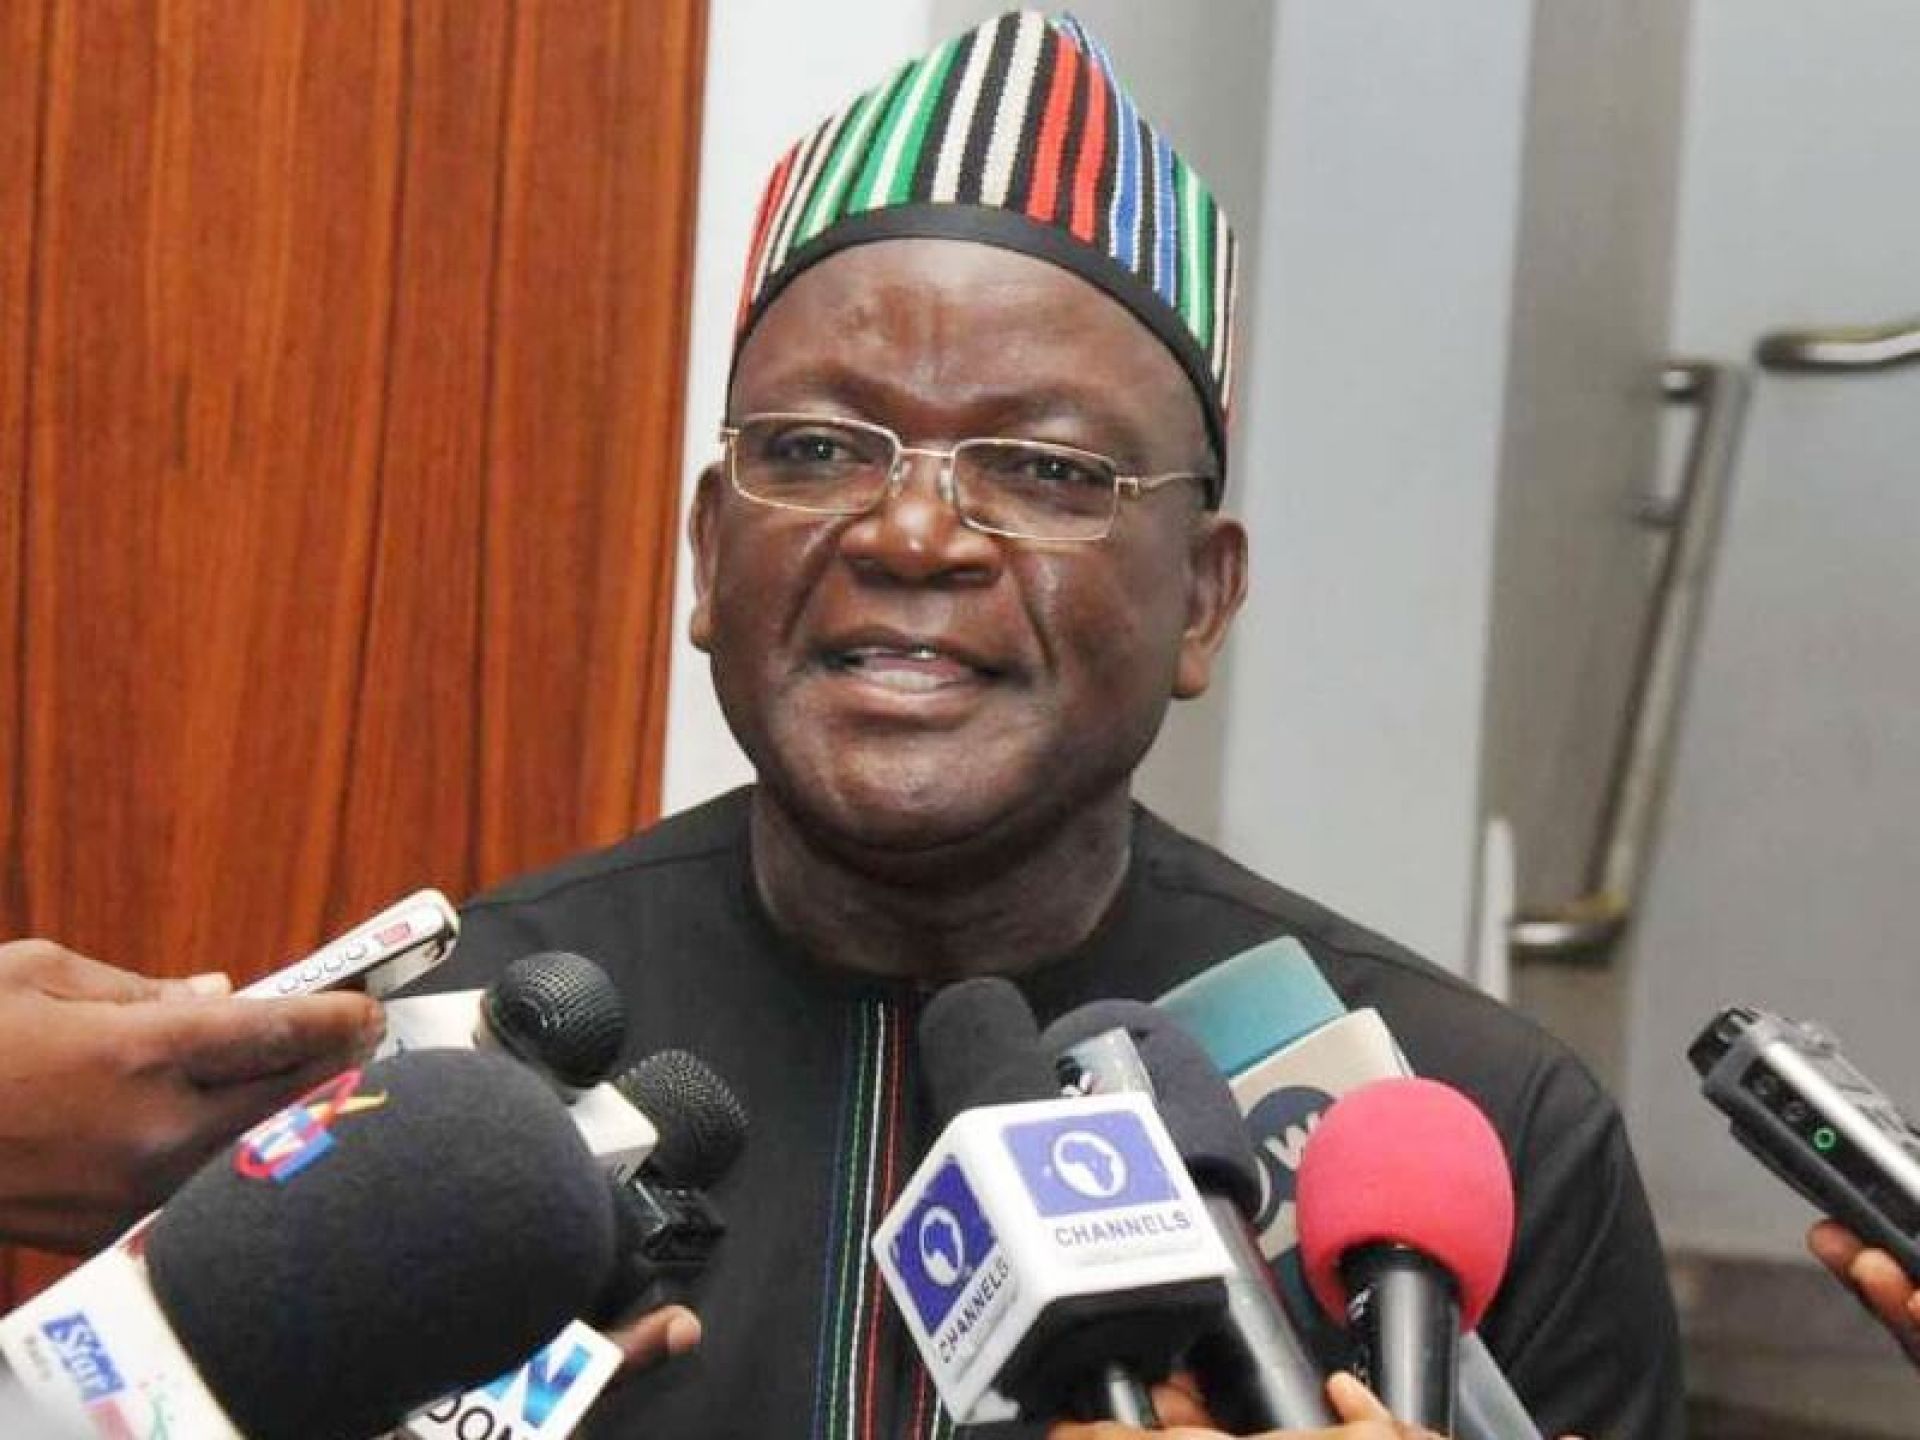 ₦10bn Suit: Ortom Gives Condition To Forgive Oshiomhole